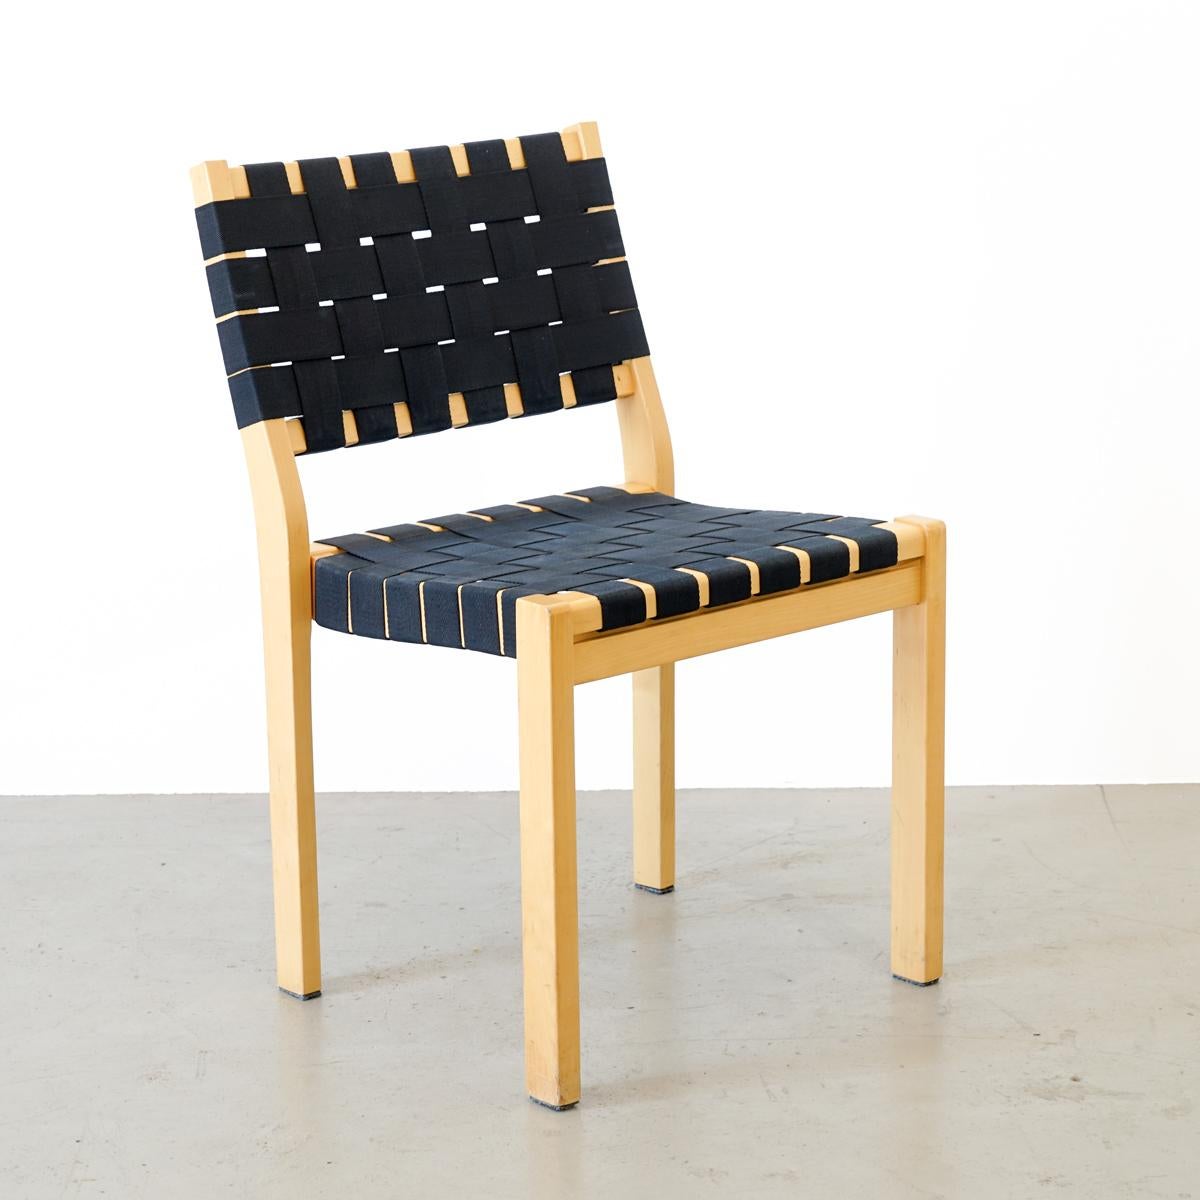 Original set of 4 chairs model 611 designed by Alvar Aalto in 1929 for Artek, Finland. The seat and backrest formed by interweaved bands of black linen and the linear frame made of birchwood make the chair to a distinctive design. This chair